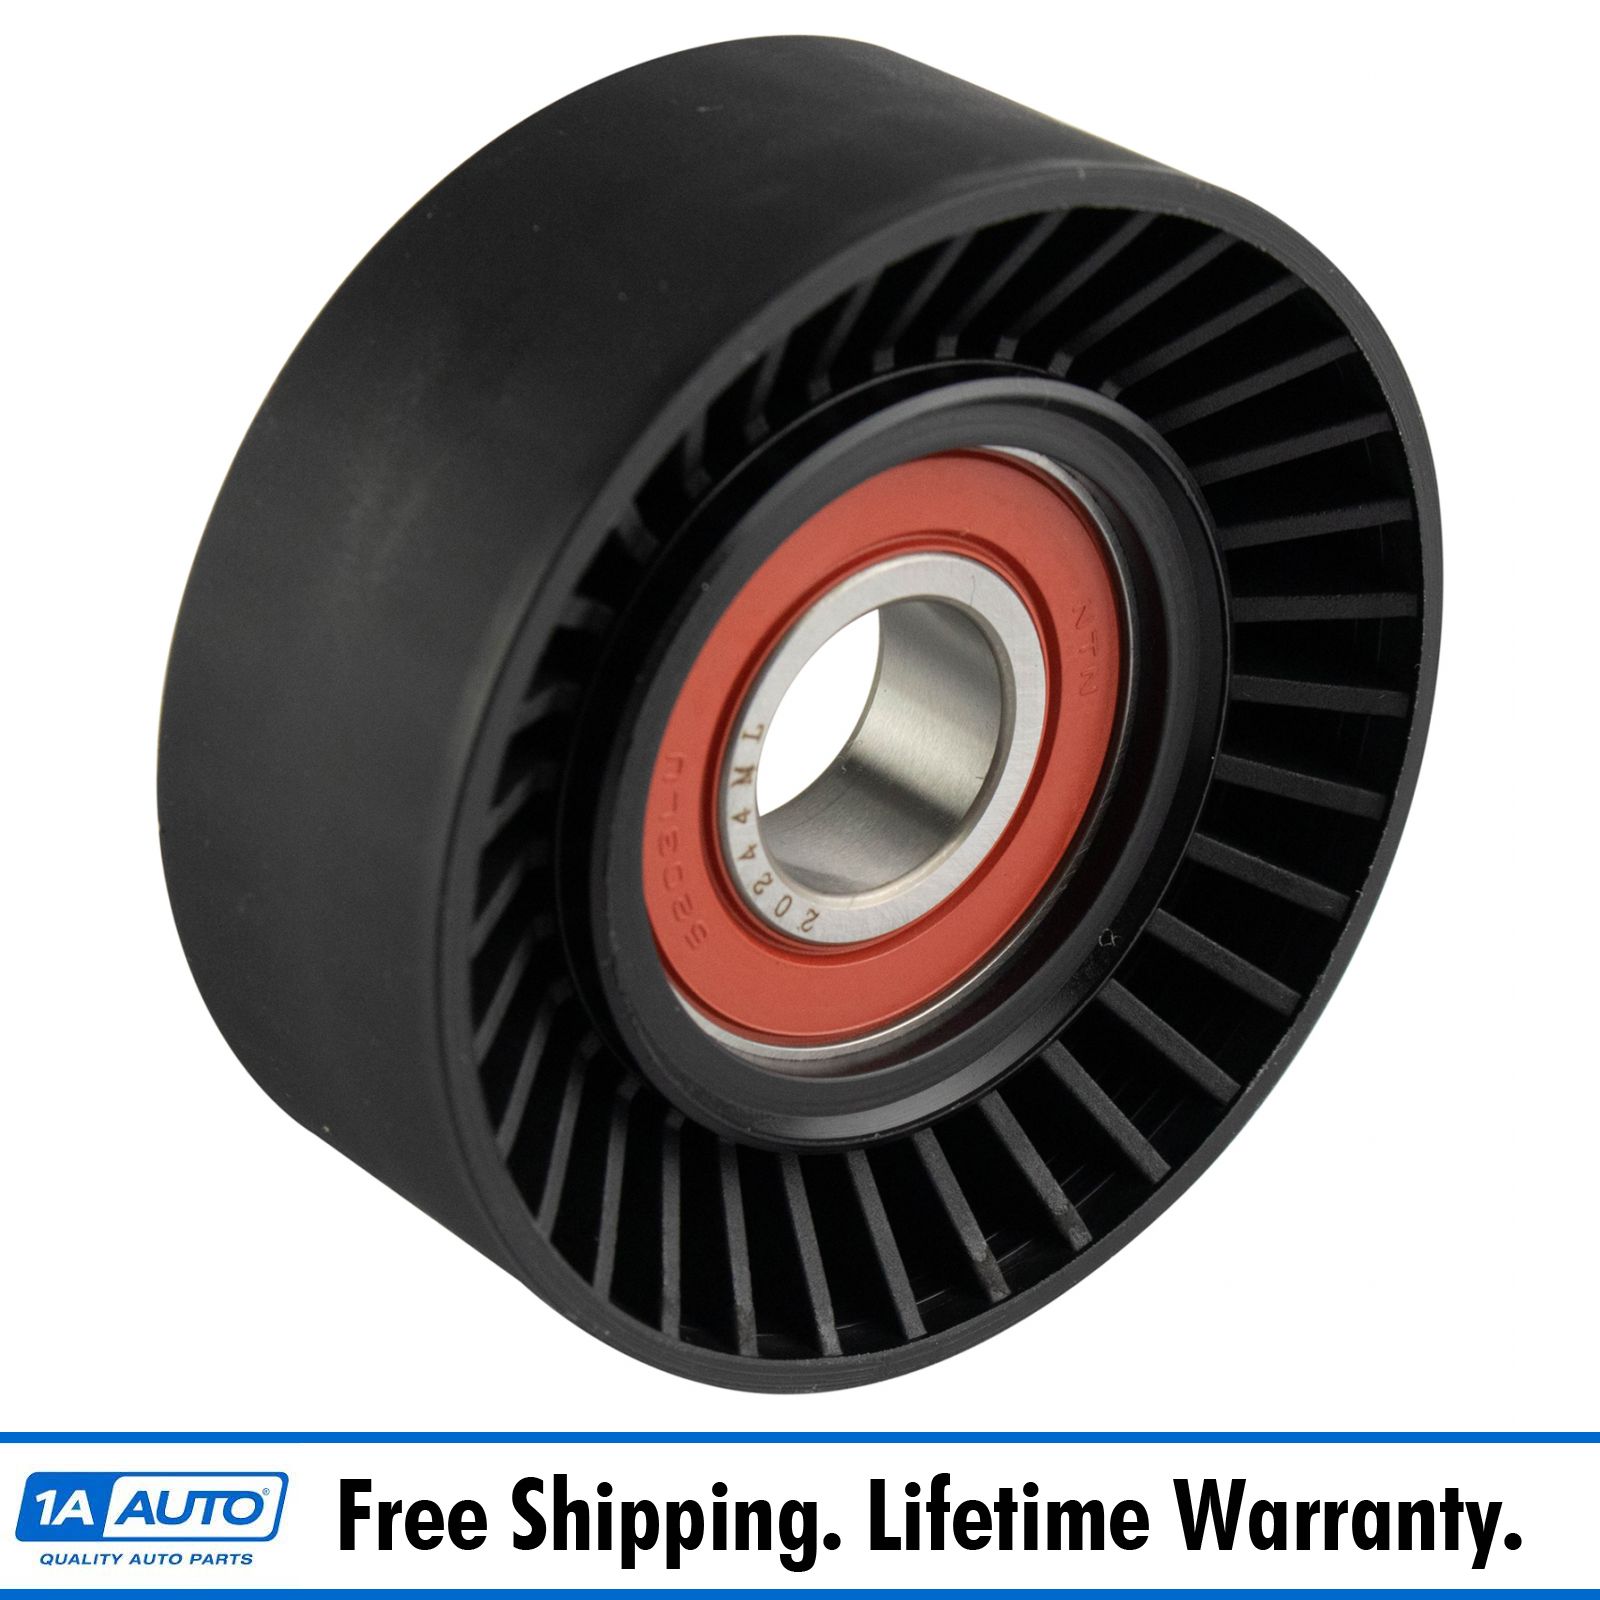 Serpentine Belt fits 2010 Chrysler Town & Country V6 3.8L Flex Naturally Aspirated 1 